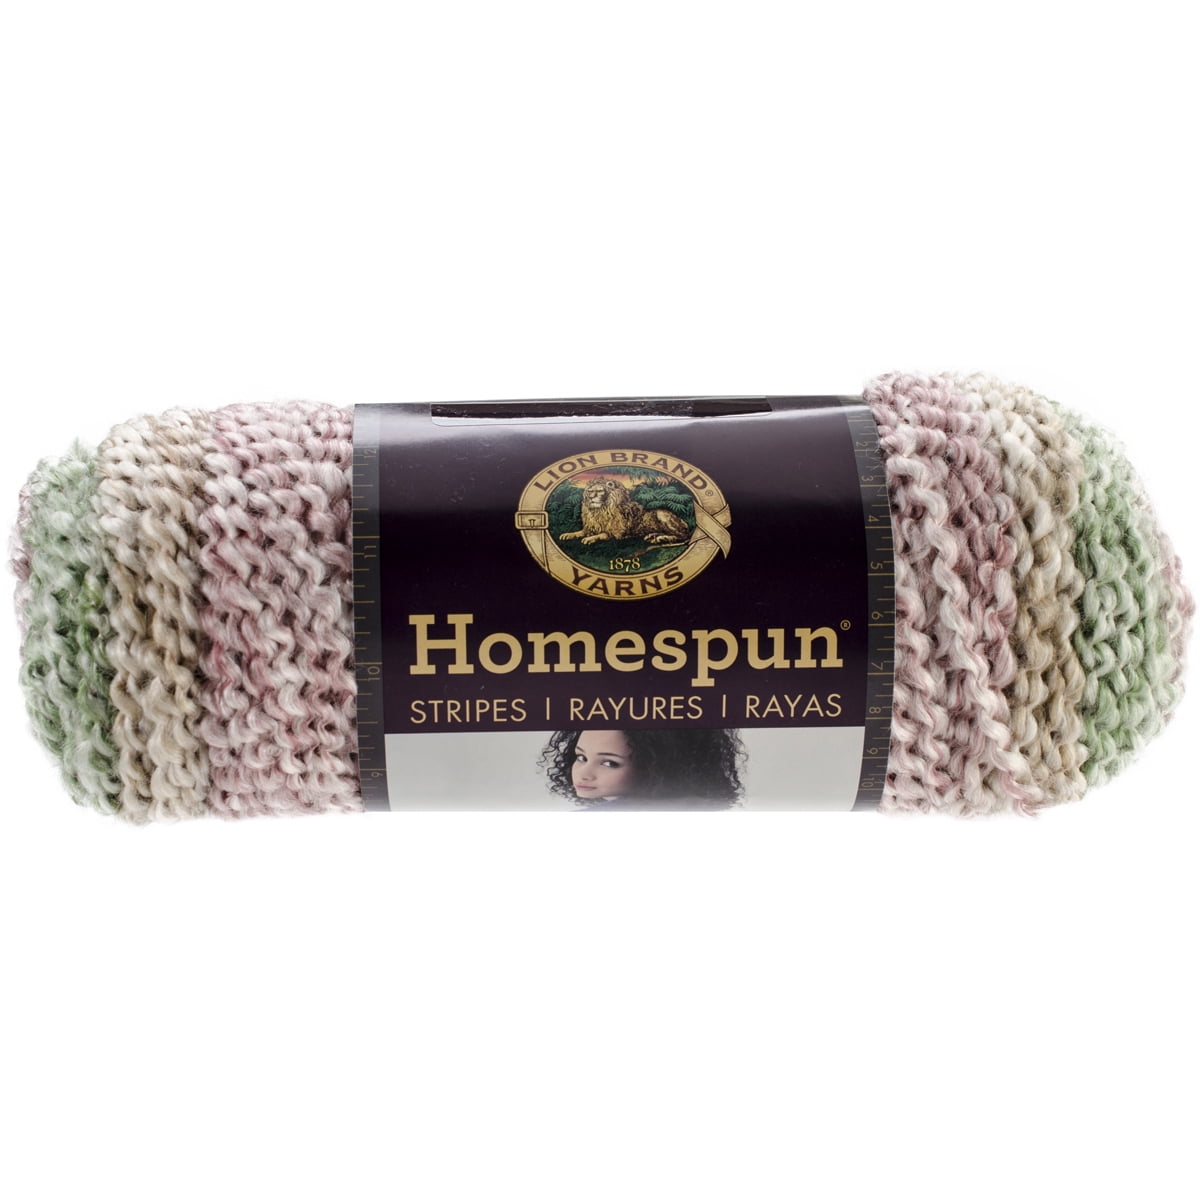 Lions Brand Yarn Homespun 2 Skeins No326 Ranch Acrylic Polyester  *Discontinued*